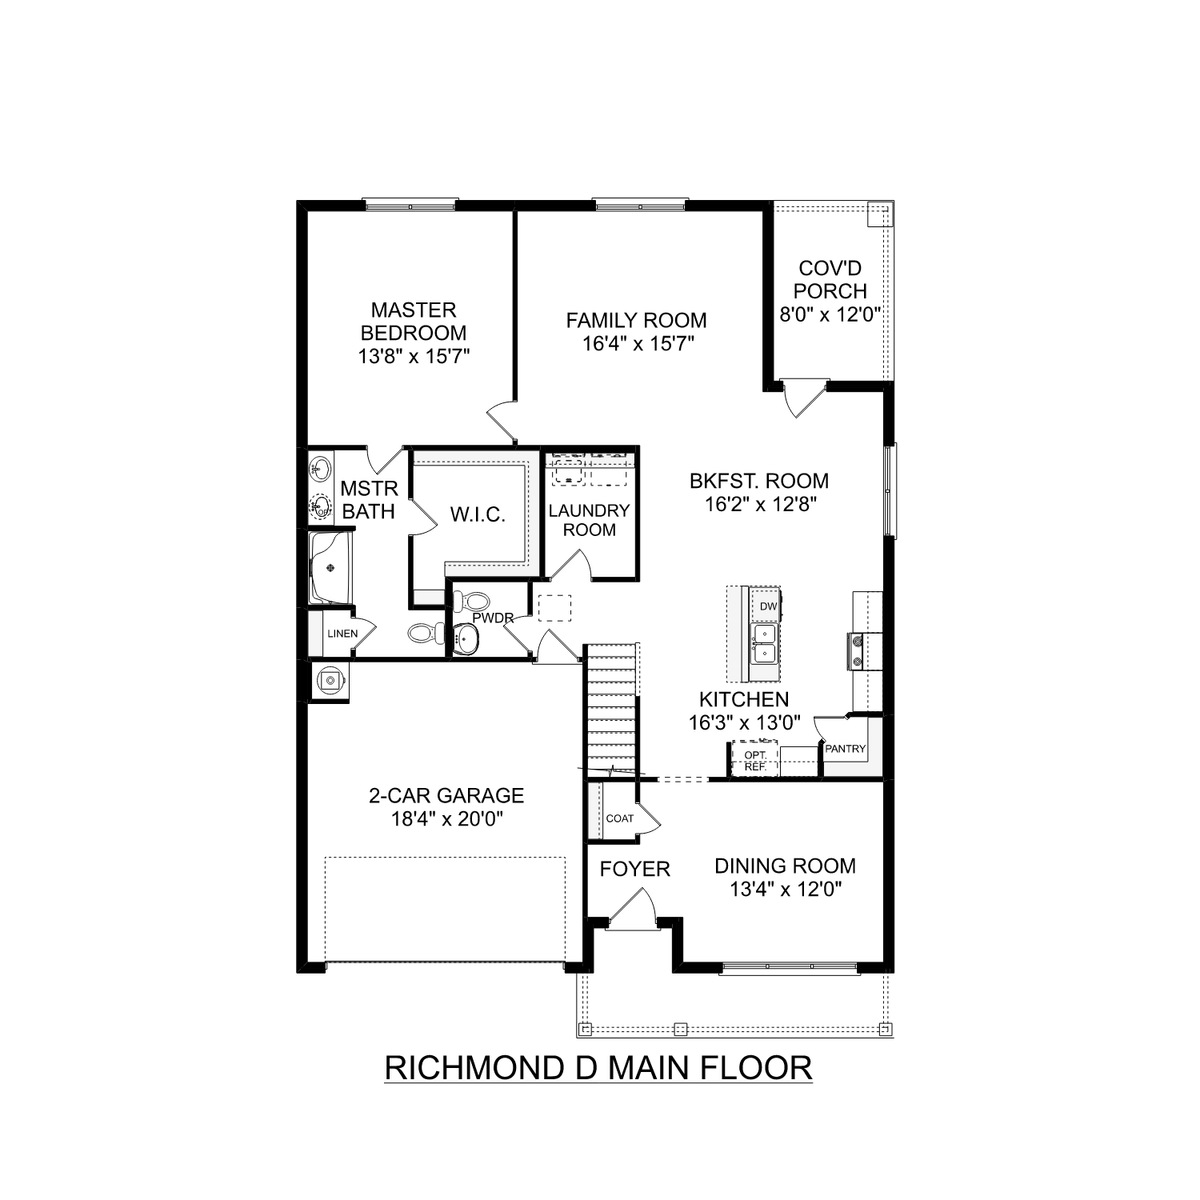 1 - The Richmond D buildable floor plan layout in Davidson Homes' Ricketts Farm community.